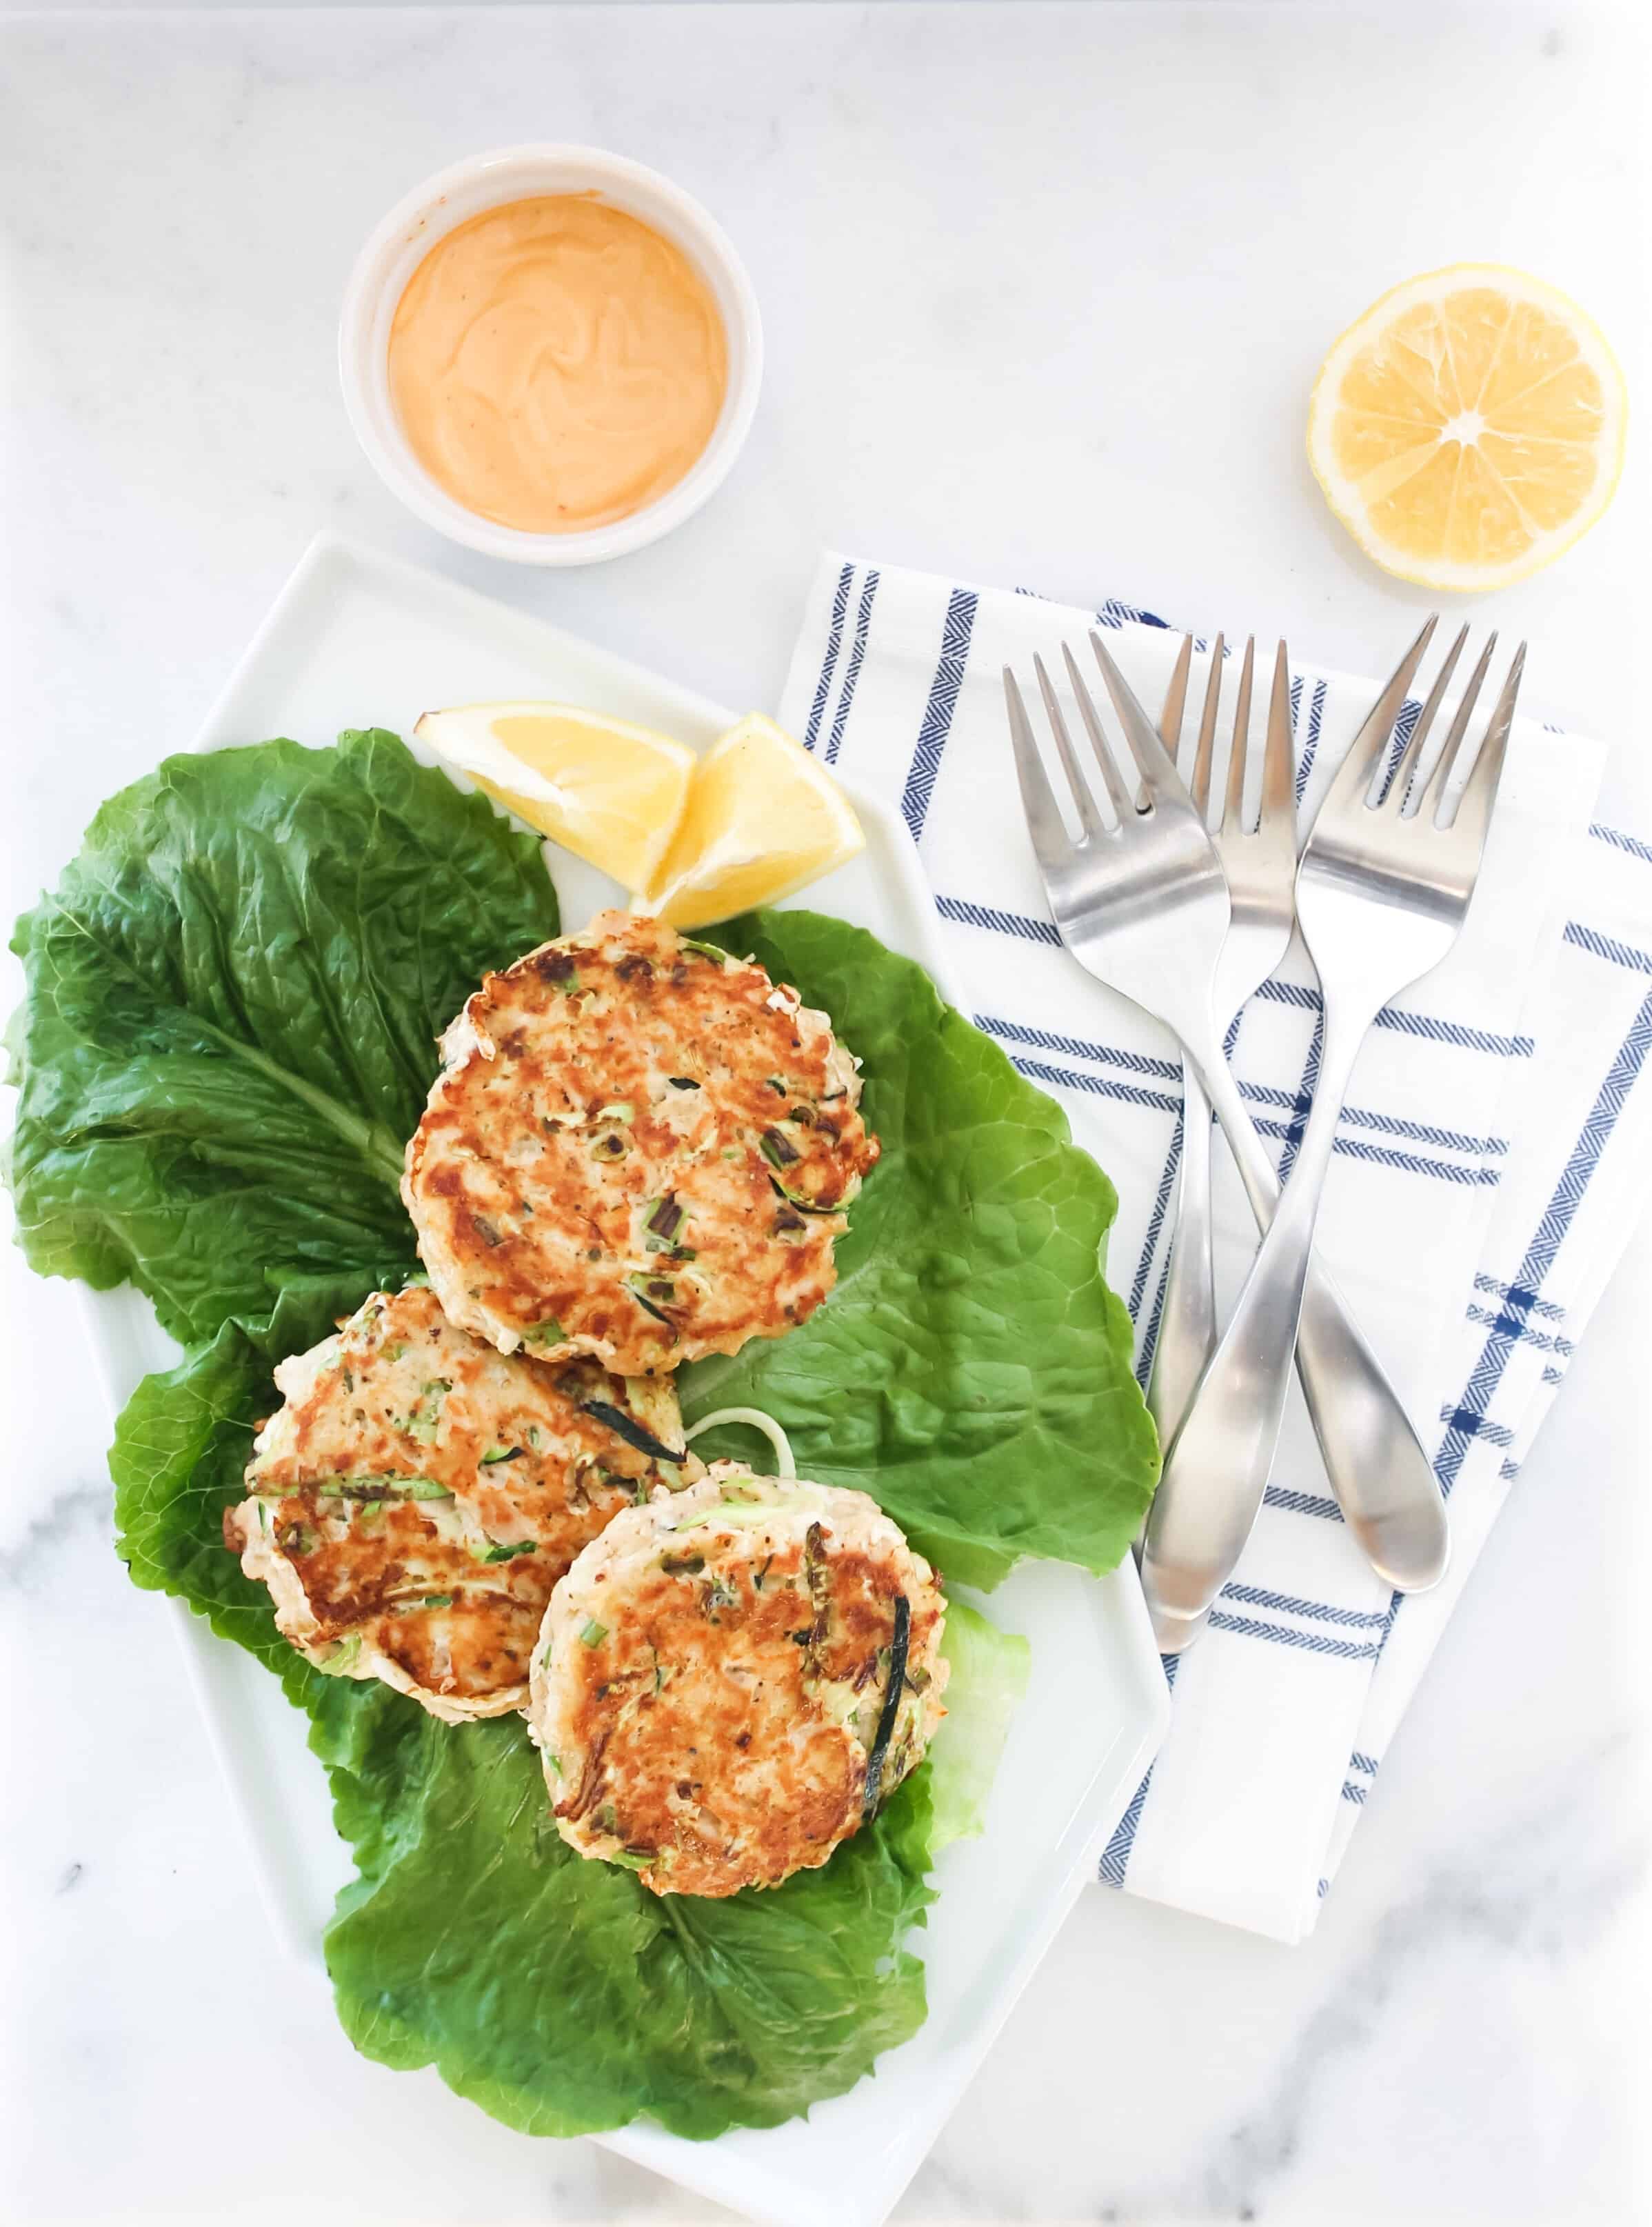 Find these Zucchini Tuna Cakes and more in this recipe roundup for Seafood Nutrition Month on the Street Smart Nutrition Blog in partnership with Seafood Nutrition Partnership